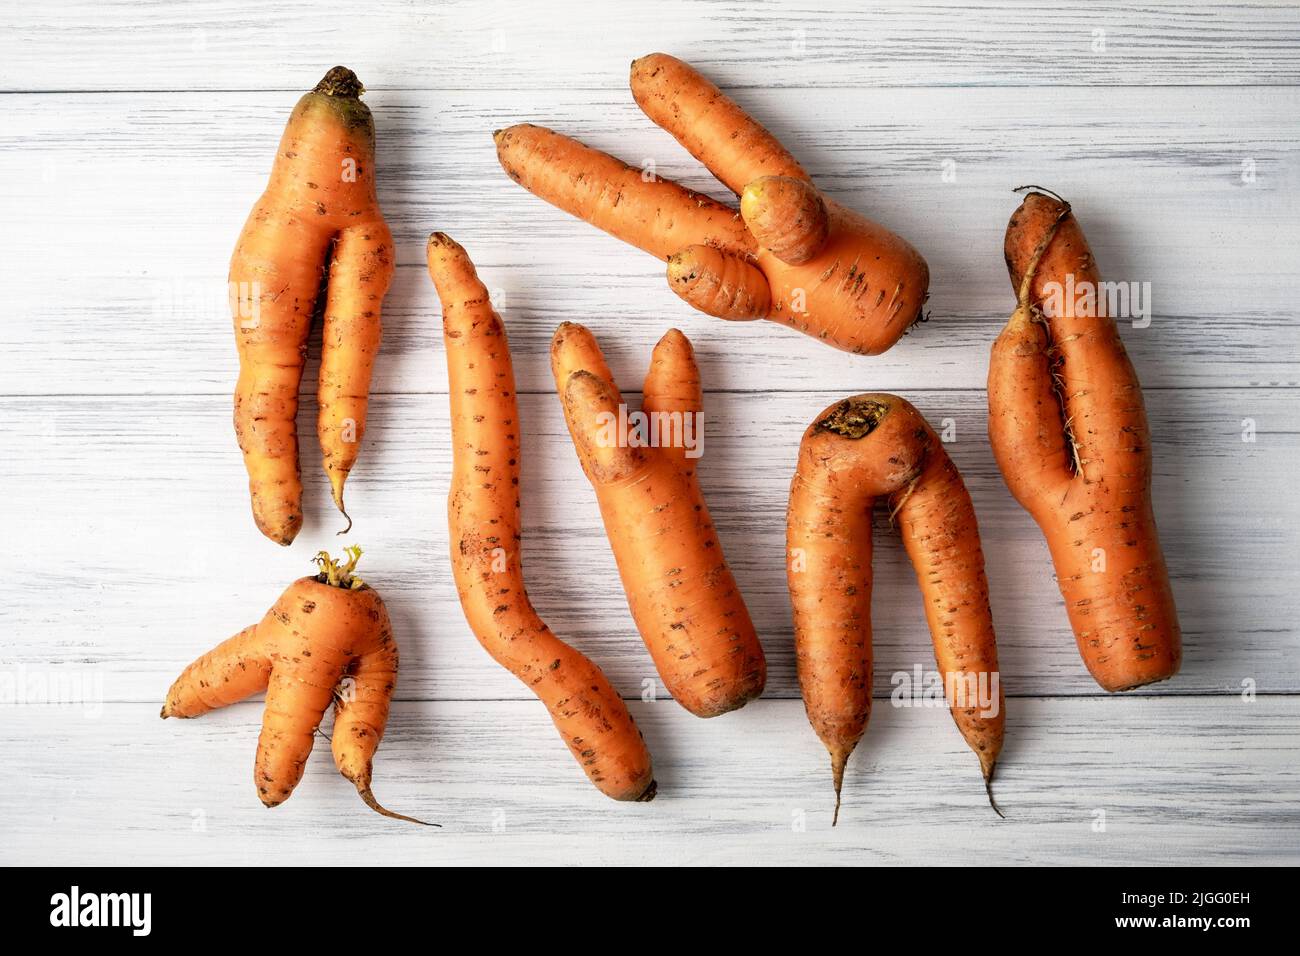 Several ripe orange ugly carrots lie on a light wooden surface. Selective focus. Stock Photo